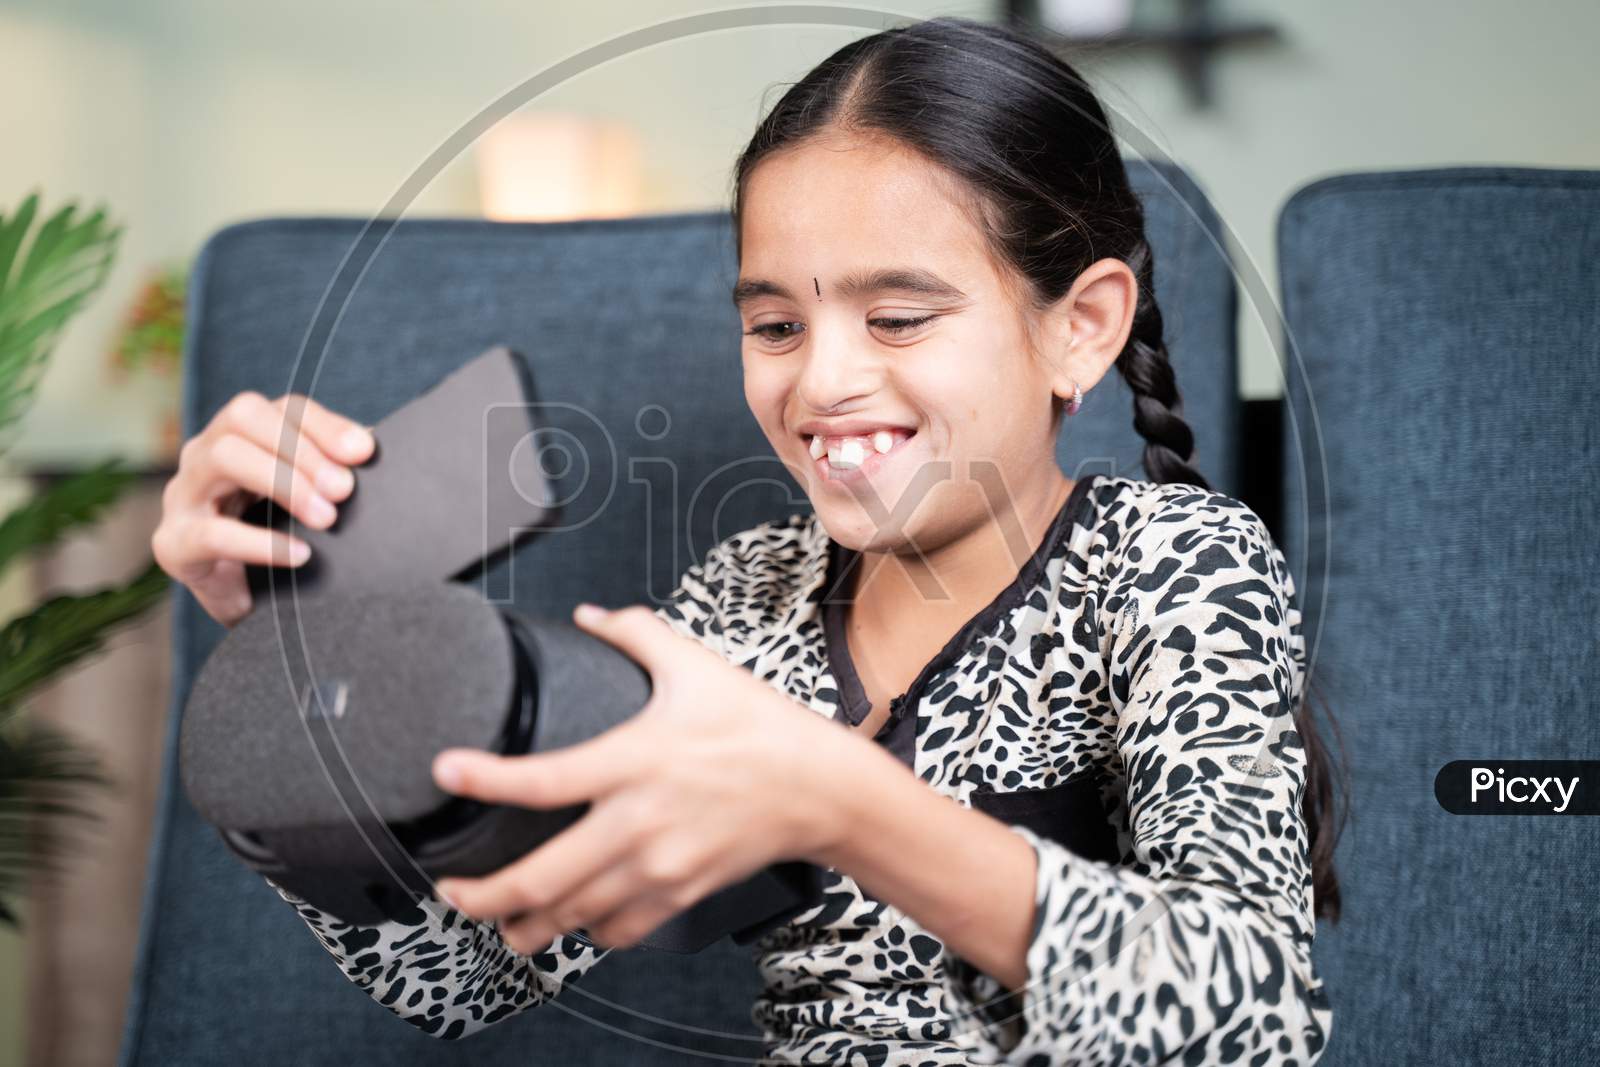 Happy Smiling Young Girl Kid Placing Mobile Phone Inside The Vr Or Virtual Reality Goggles While Sitting On Sofa And Trying To Use It At Home.